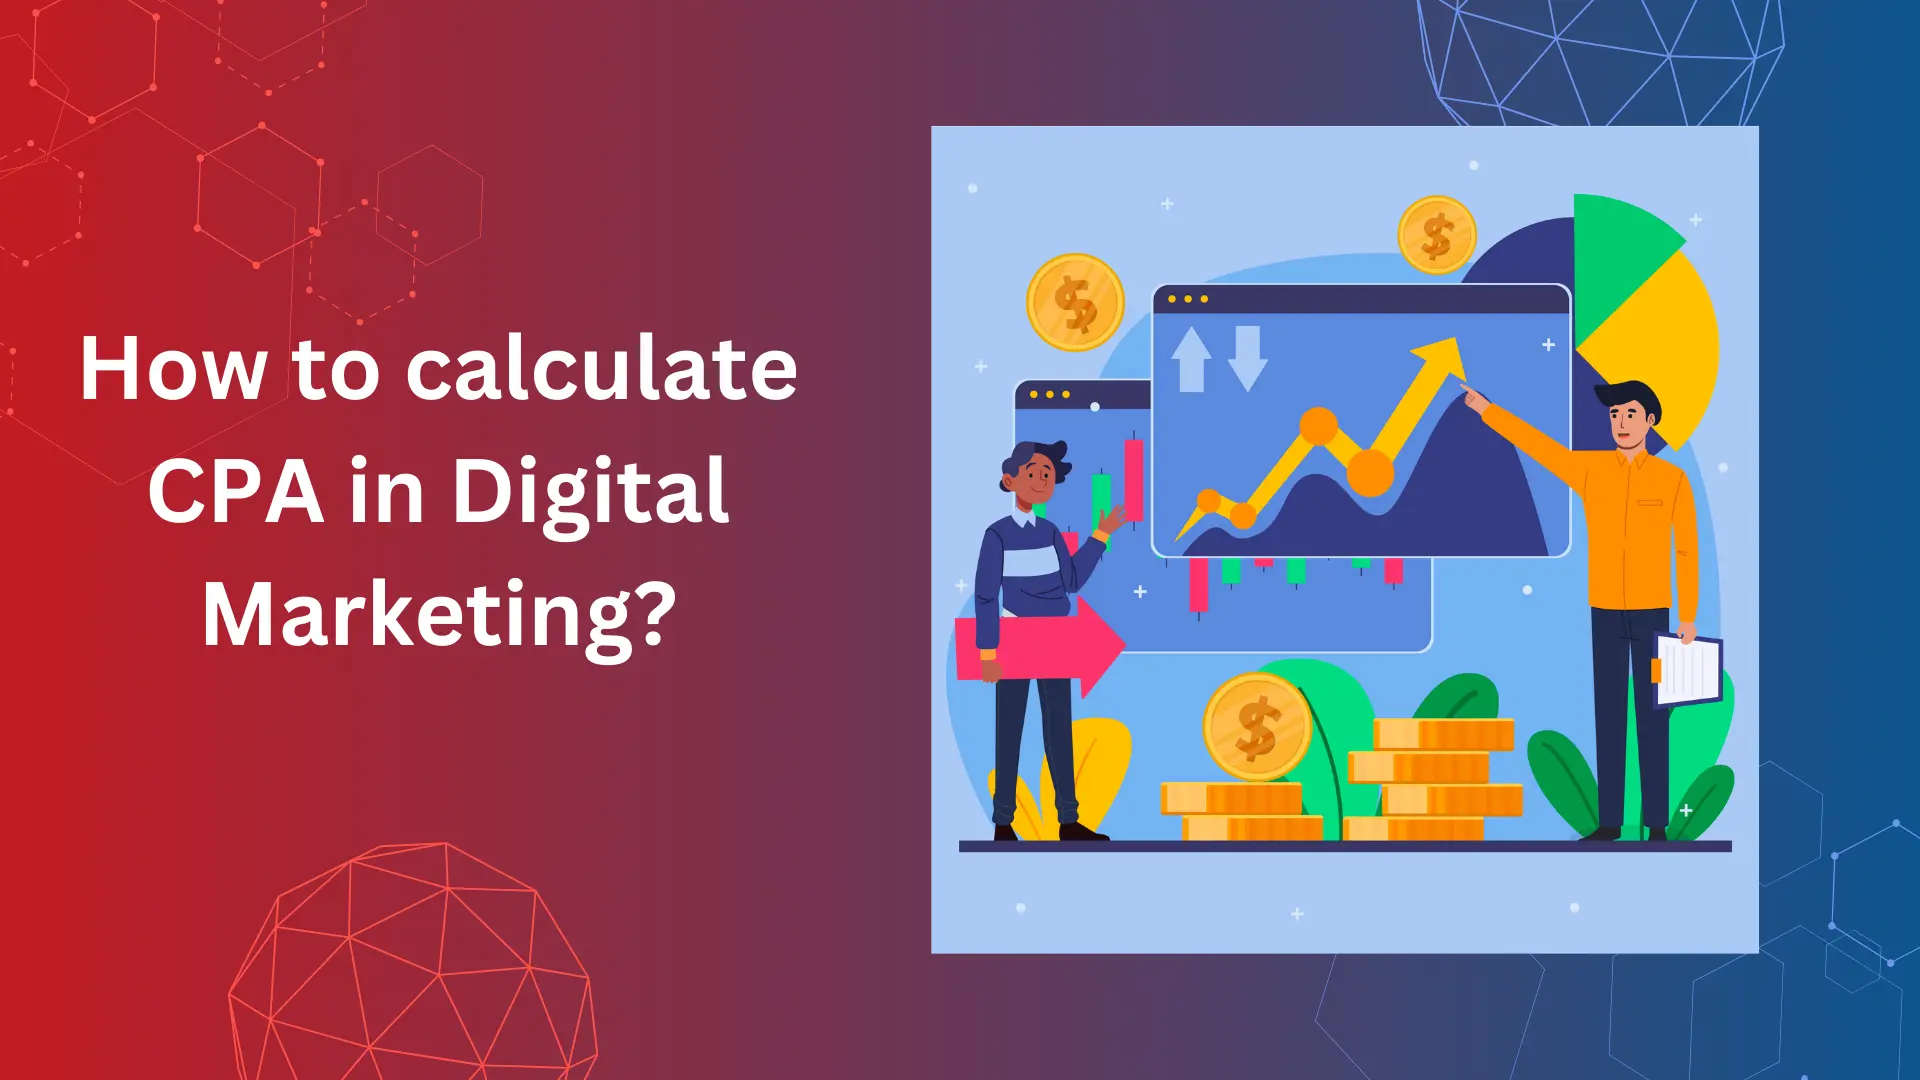 How to calculate CPA in Digital Marketing